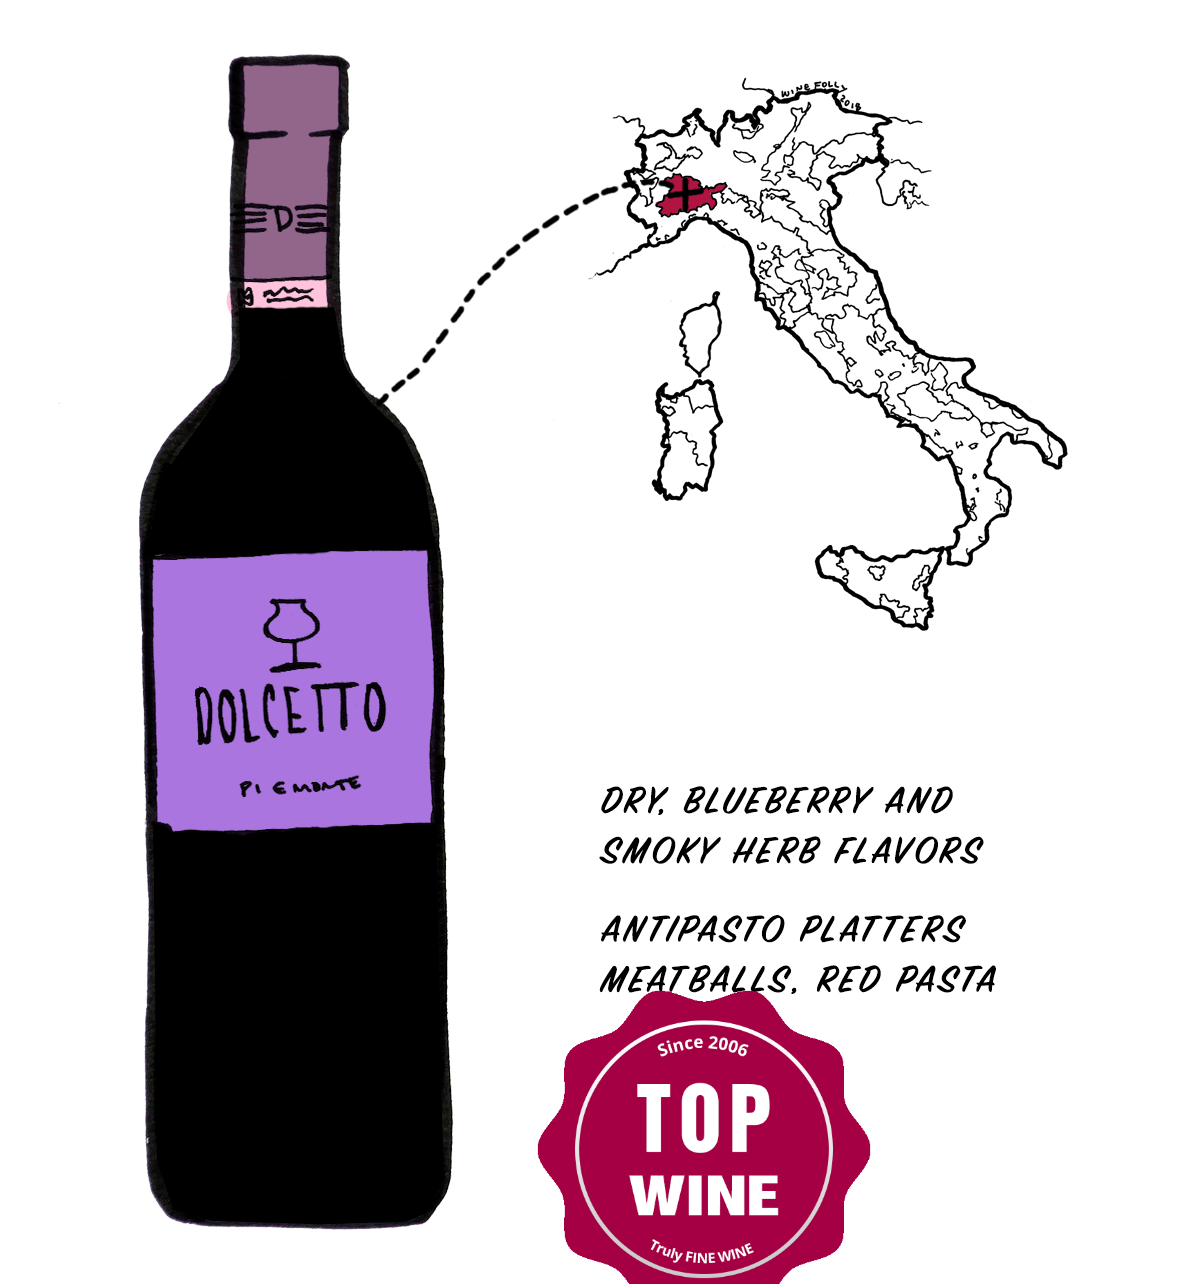 dolcetto-grape-wine-illustration-winefolly_1.png